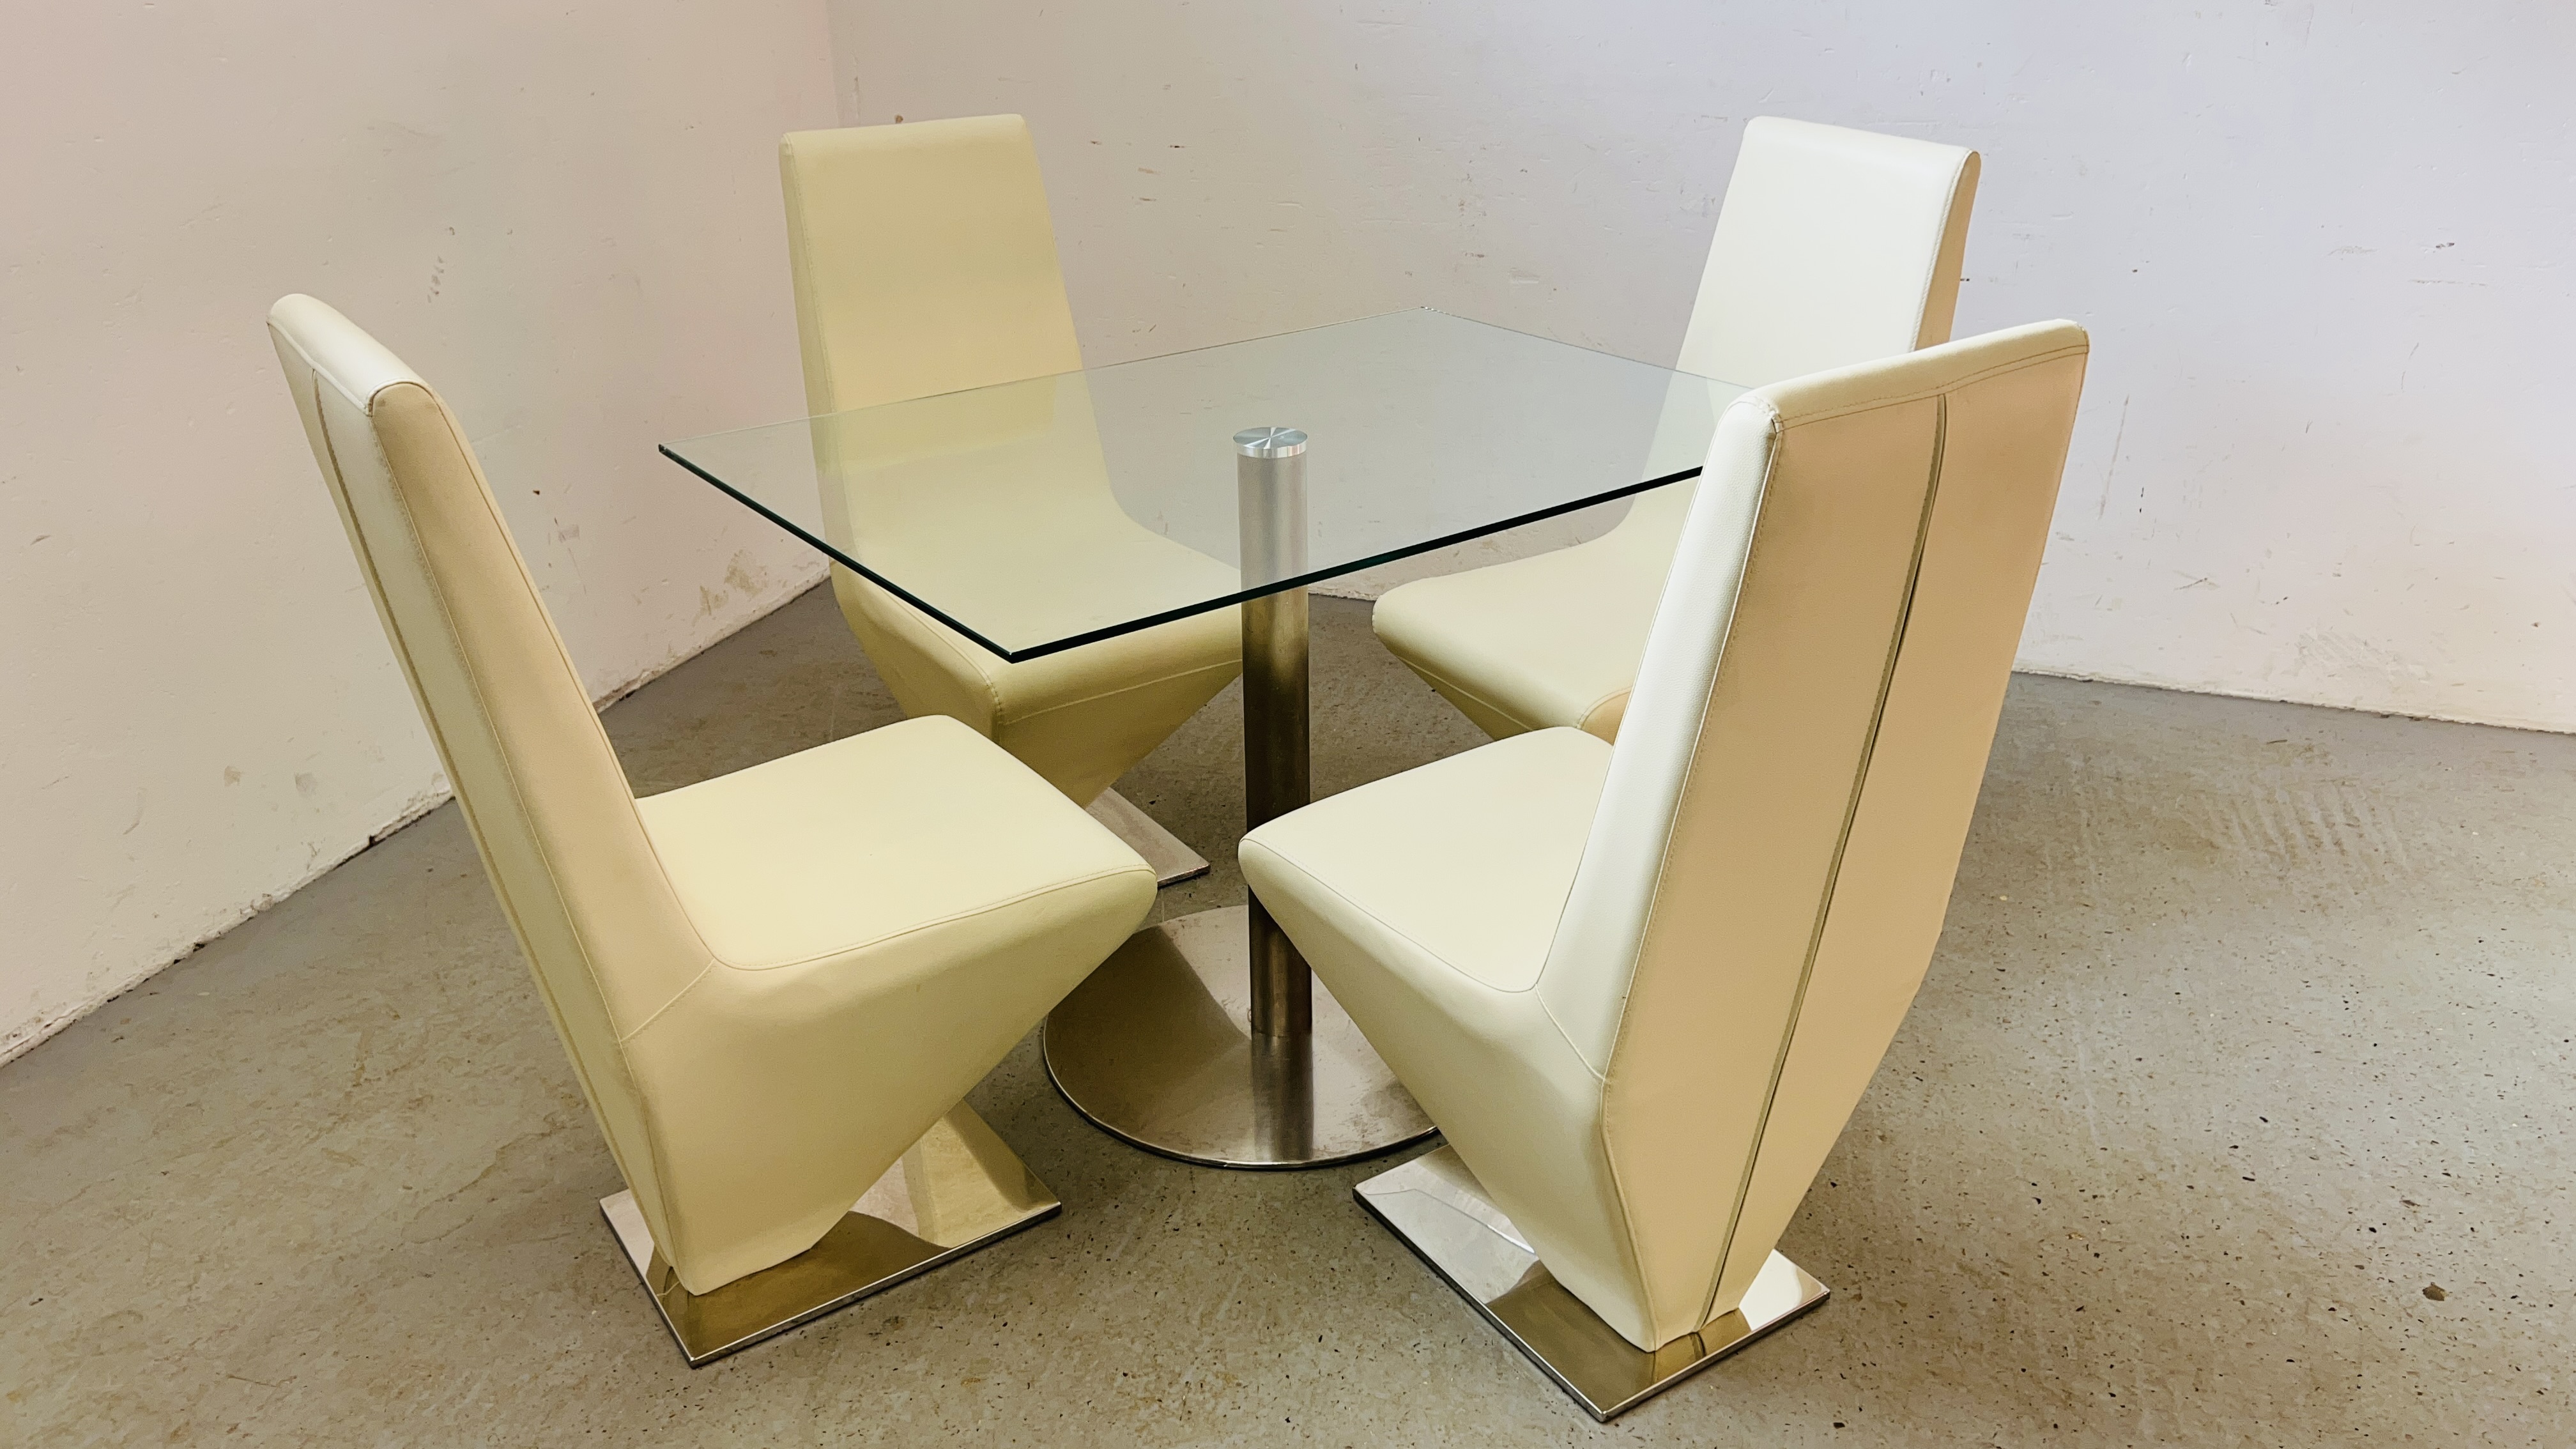 A MODERN DESIGNER GLASS TOP RECTANGULAR DINING TABLE SUPPORTED BY STAINLESS STEEL PEDESTAL COMPLETE